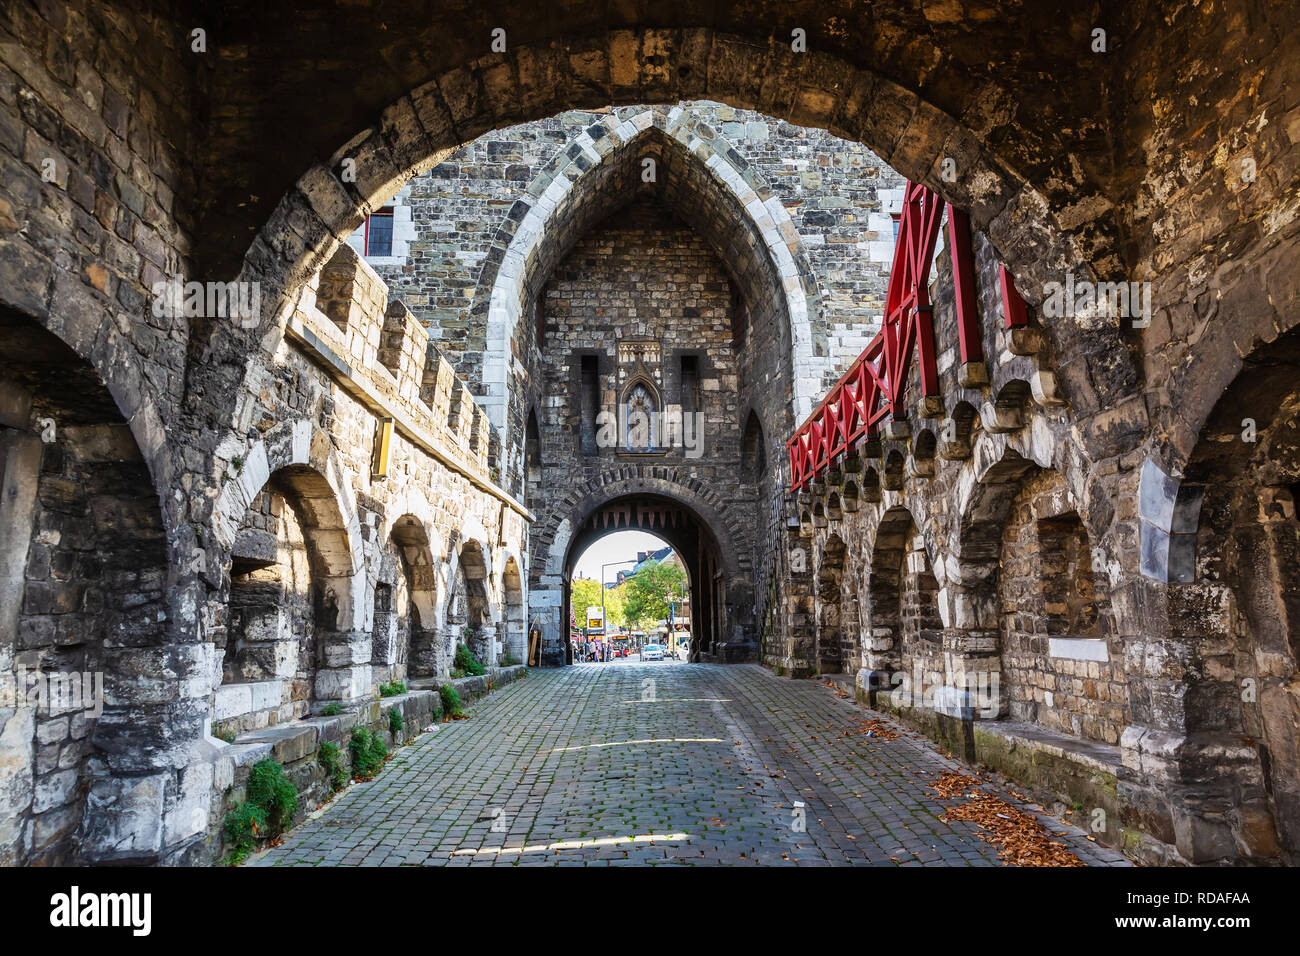 Aachen, Germany - October 12, 2018: historical Ponttor with unidentified people. The Ponttor is one of the two remaining gates of the original city wa Stock Photo